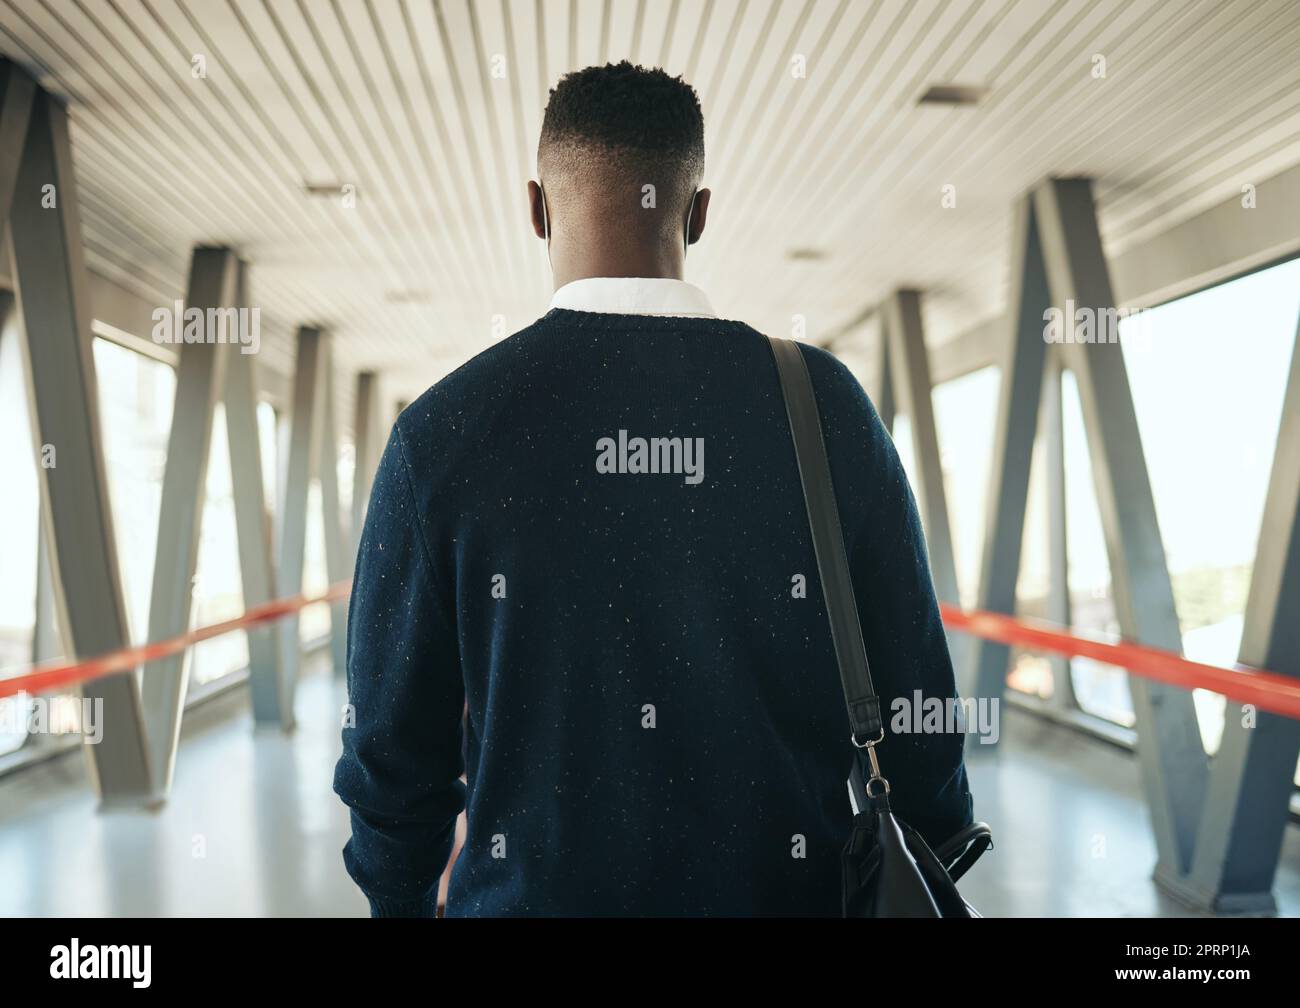 Travel, vision and black business man taking trip to meeting or global networking seminar, rear view of entrepreneur at the airport. Young professional on mission to upskill and achieve career goals Stock Photo